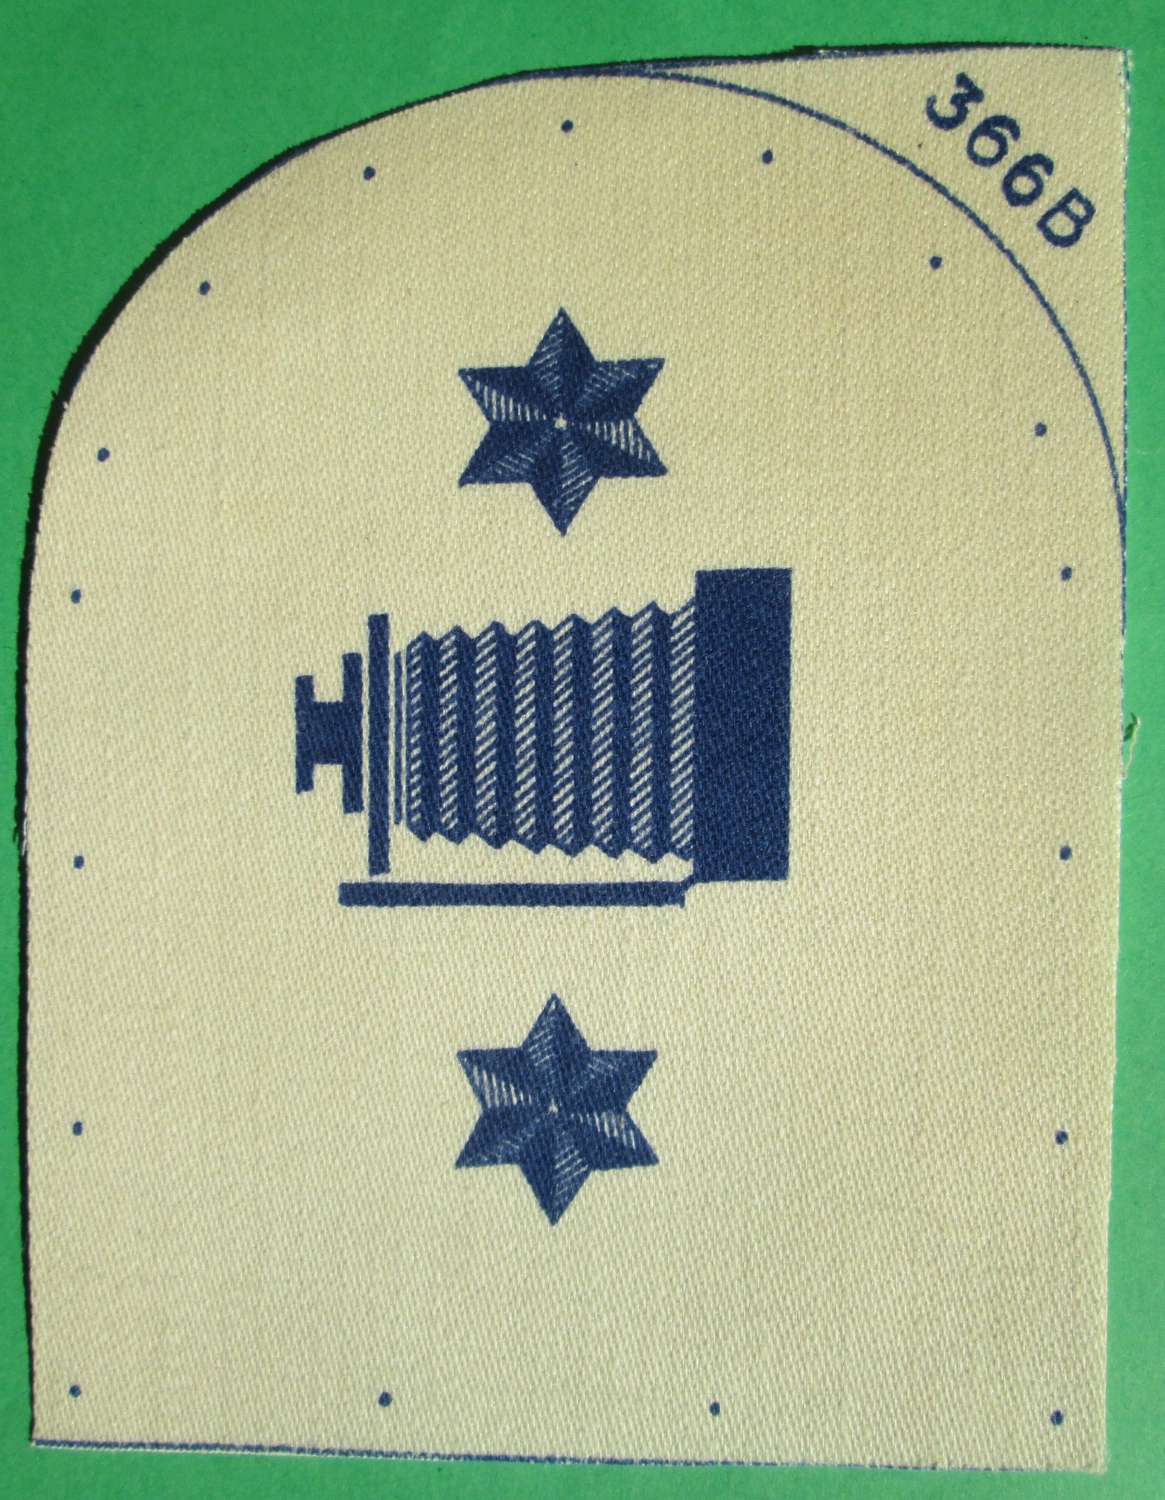 A WWII NAVAL PHOTOGRAPHERS 2ND CLASS TRADE BADGE